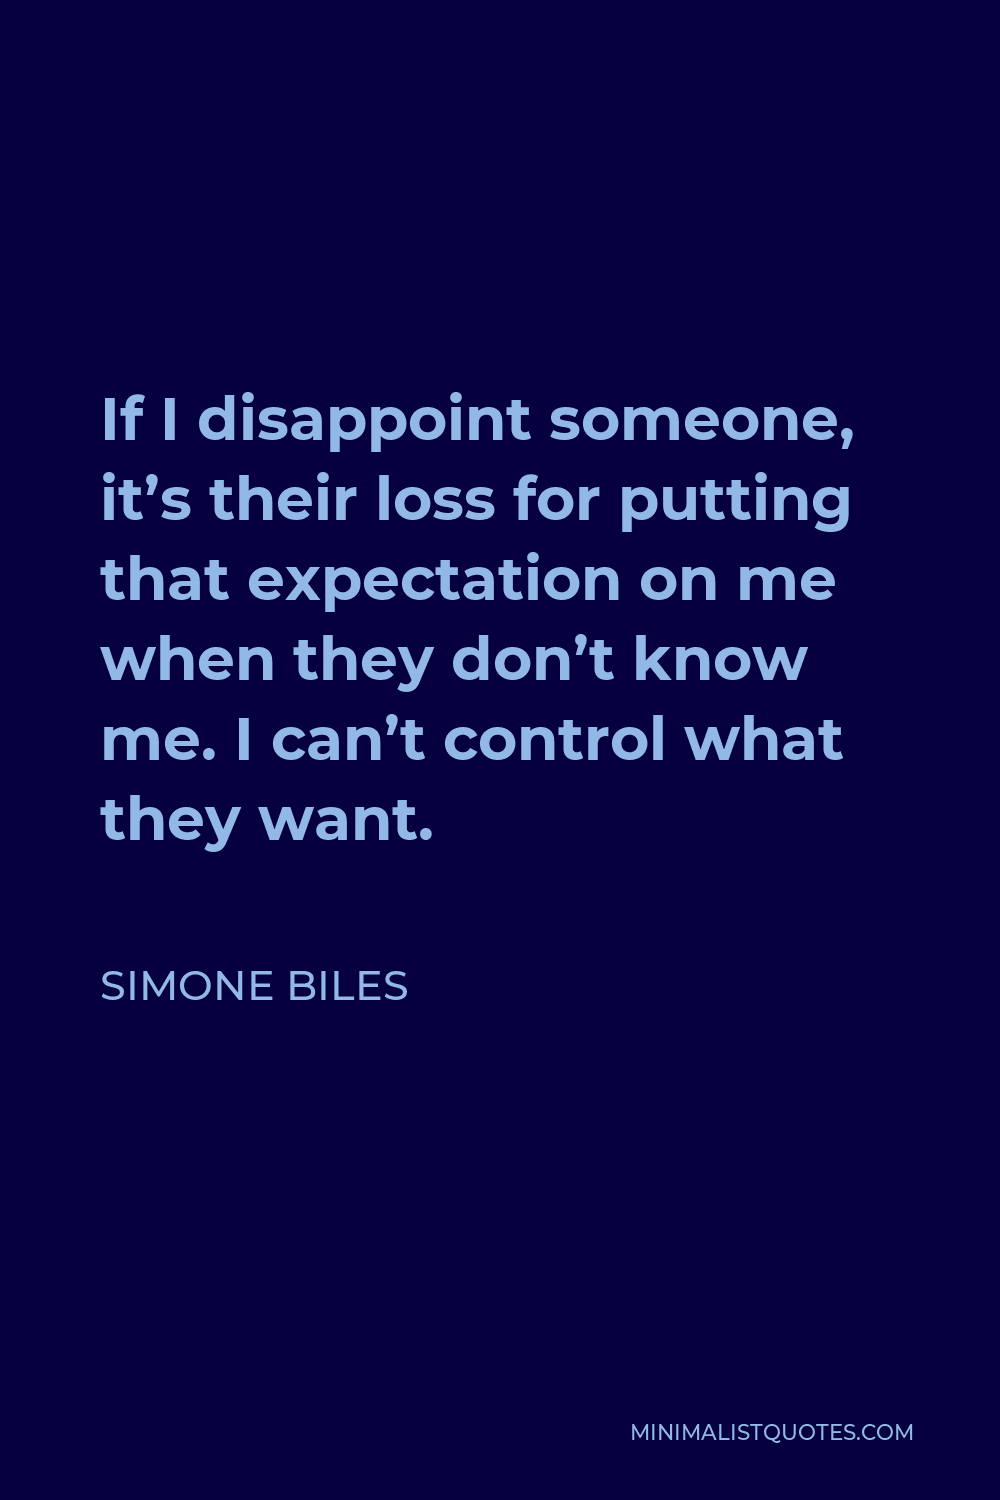 Simone Biles Quote - If I disappoint someone, it’s their loss for putting that expectation on me when they don’t know me. I can’t control what they want.